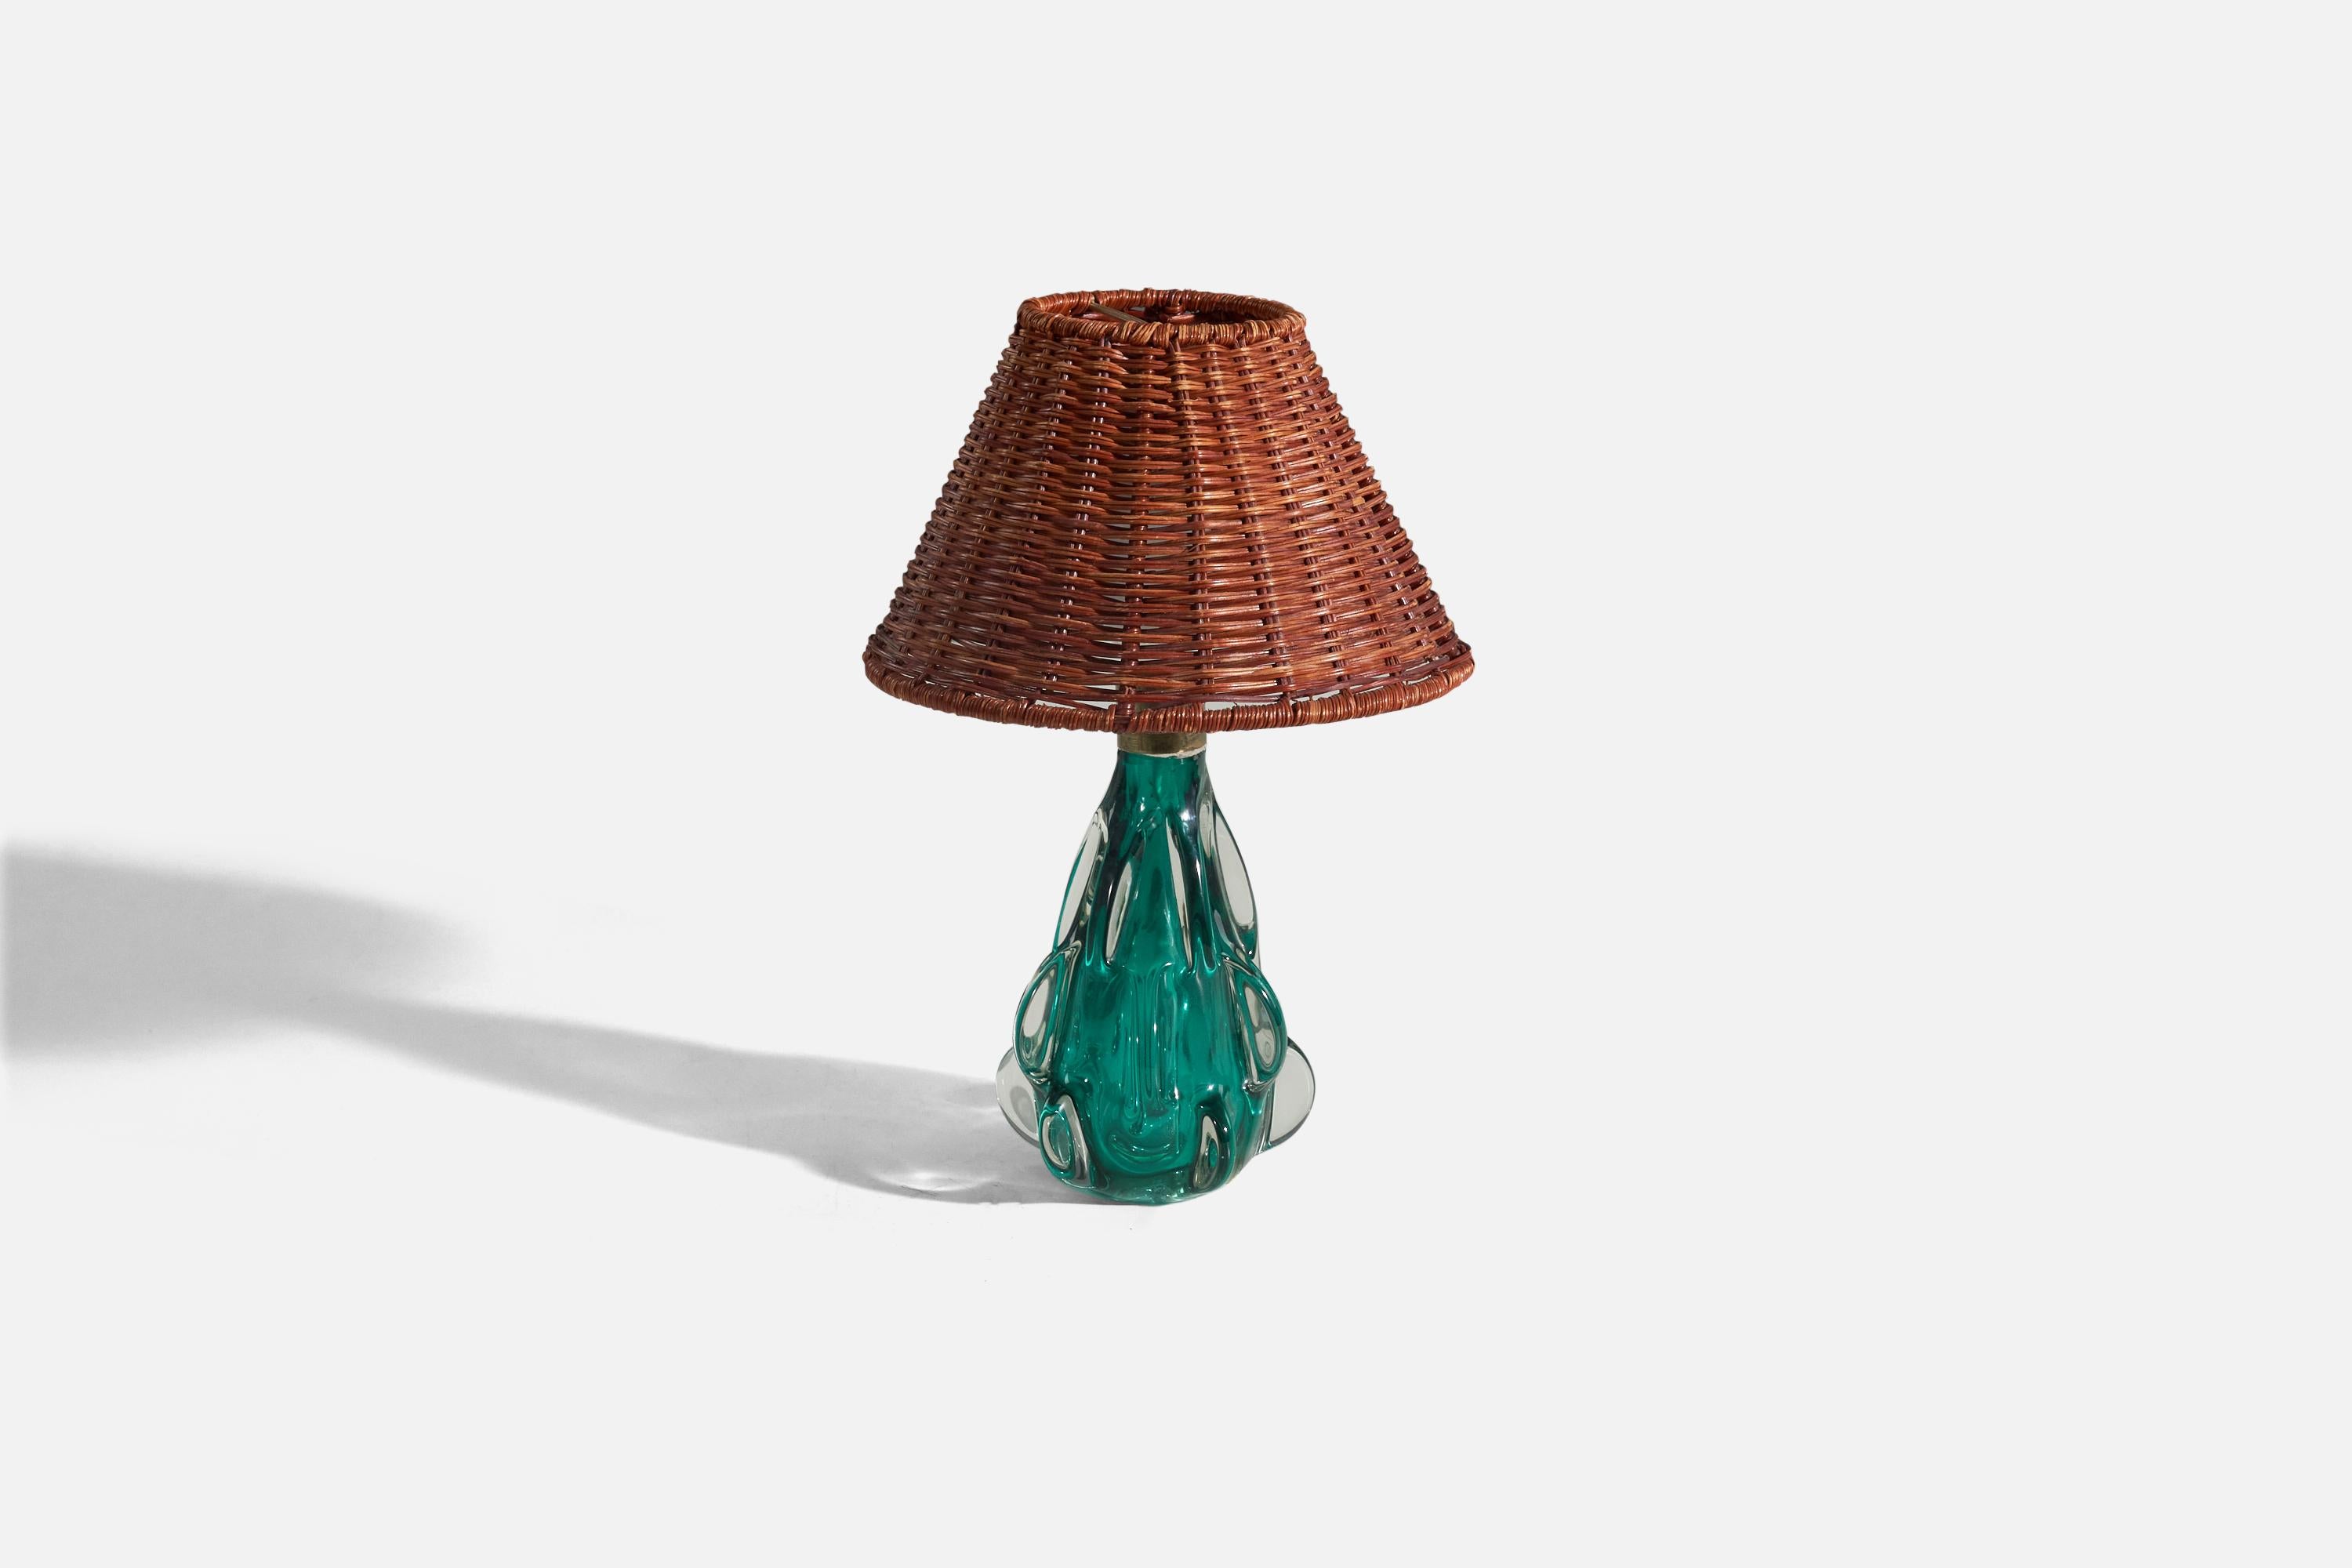 A blue Murano glass table lamp designed and produced in Murano, Italy, c. 1950s. 

Sold without lampshade. 
Dimensions of lamp (inches) : 9.56 x 4.65 x 4.56 (Height x Width x Depth)
Dimensions of shade (inches) : 3.5 x 8 x 5.37 (Top Diameter x